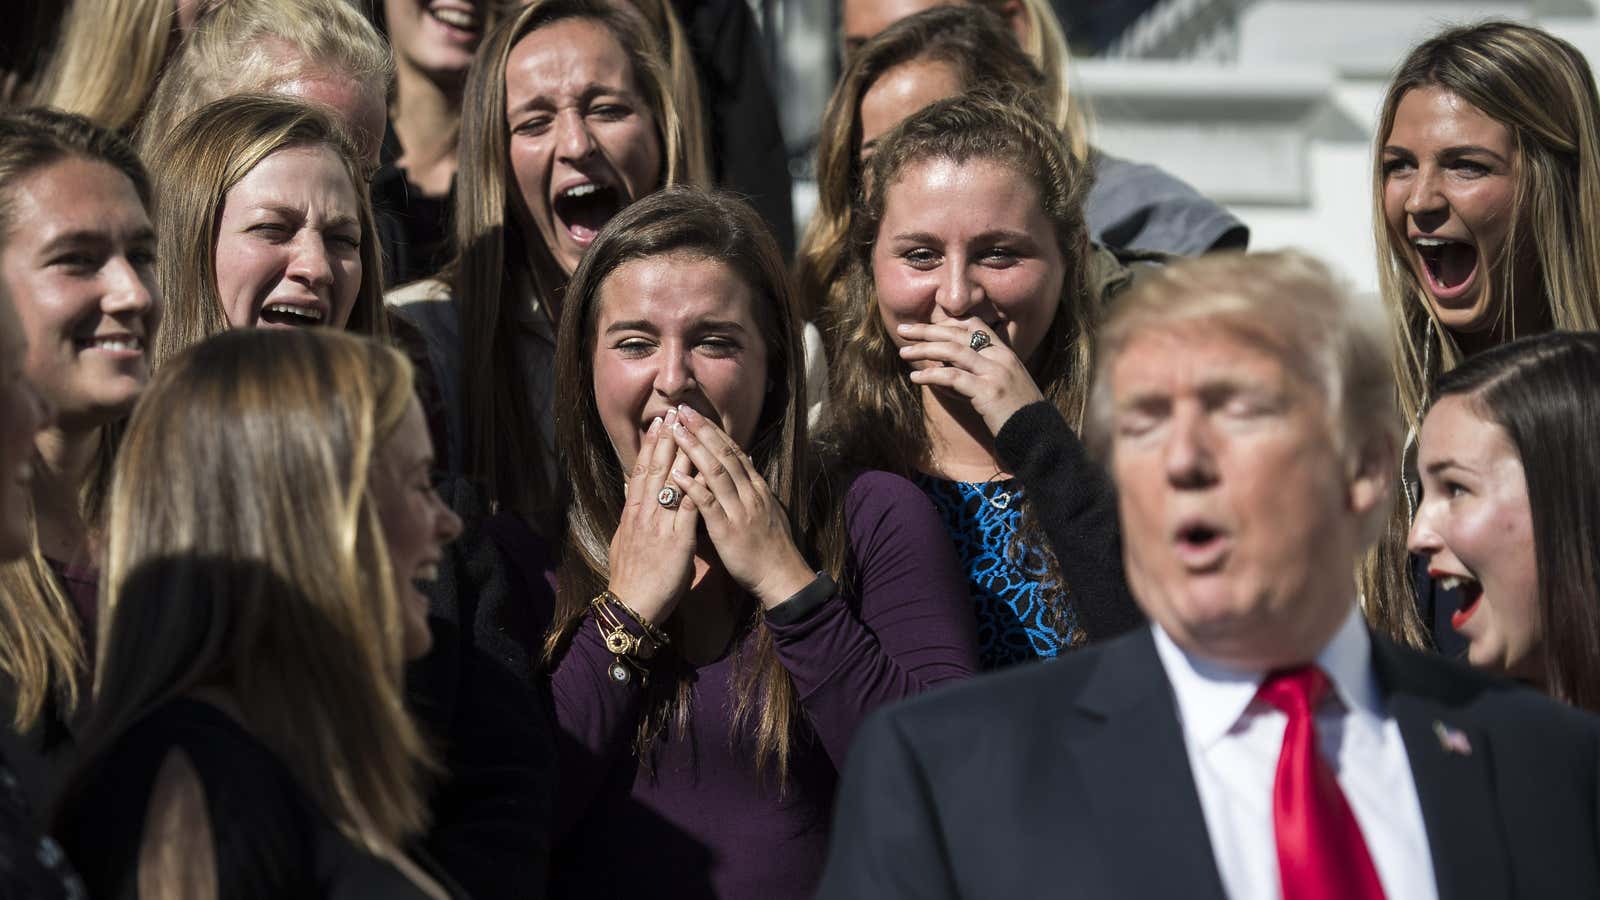 Members of the University of Maryland women’s lacrosse team react to something President Donald Trump said after posing for photographs at the White House on Nov. 17, 2017.